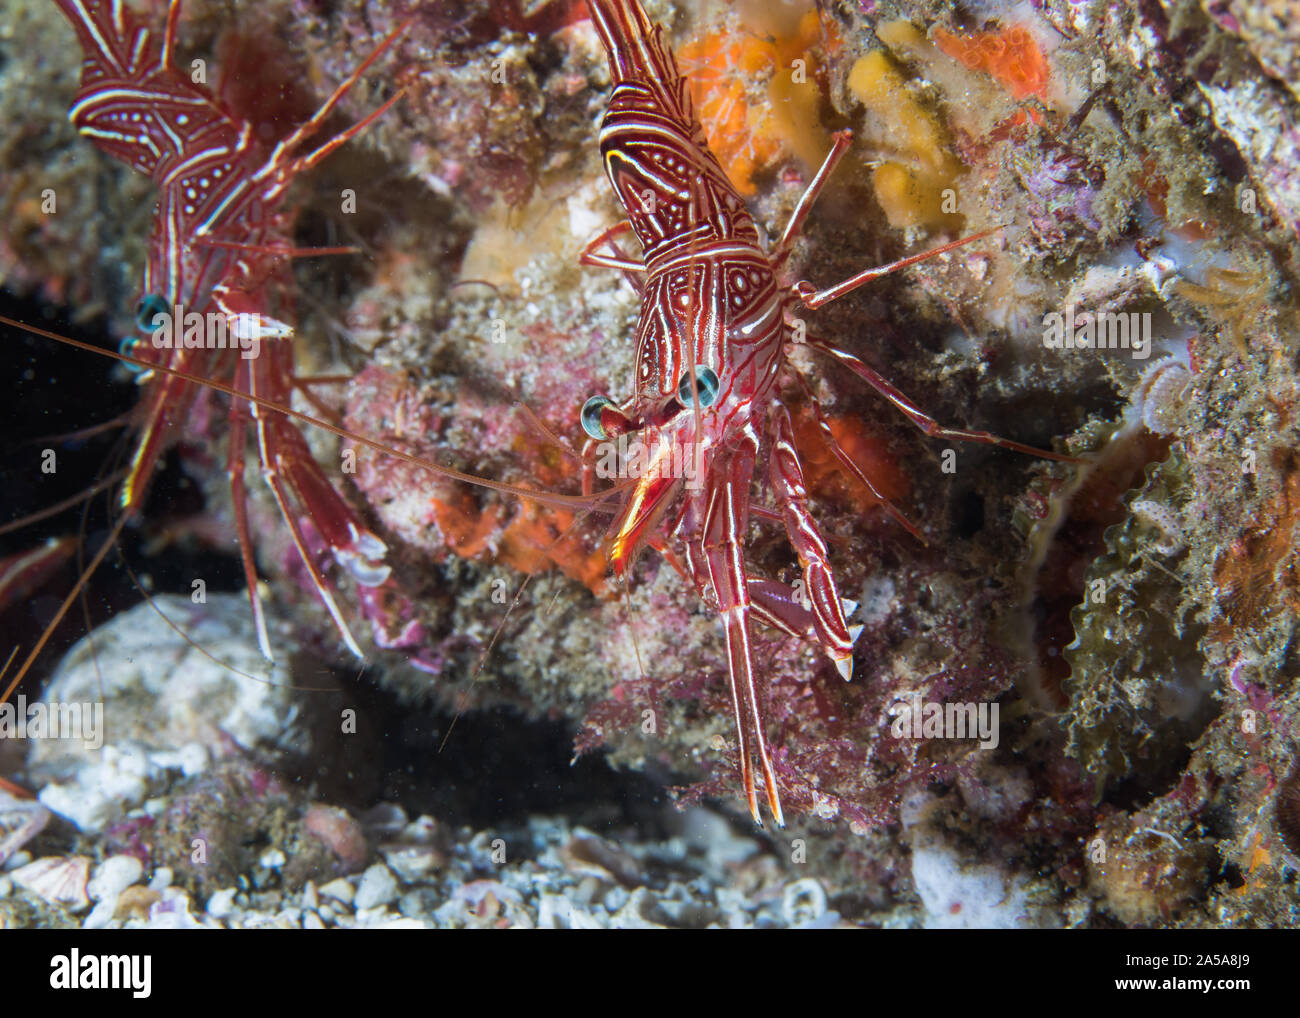 Camel hinge-beak shrimp or Dancing shrimp (Rhynchocinetes durbanensis) on the reef. Transparent body with red and white lines. Stock Photo